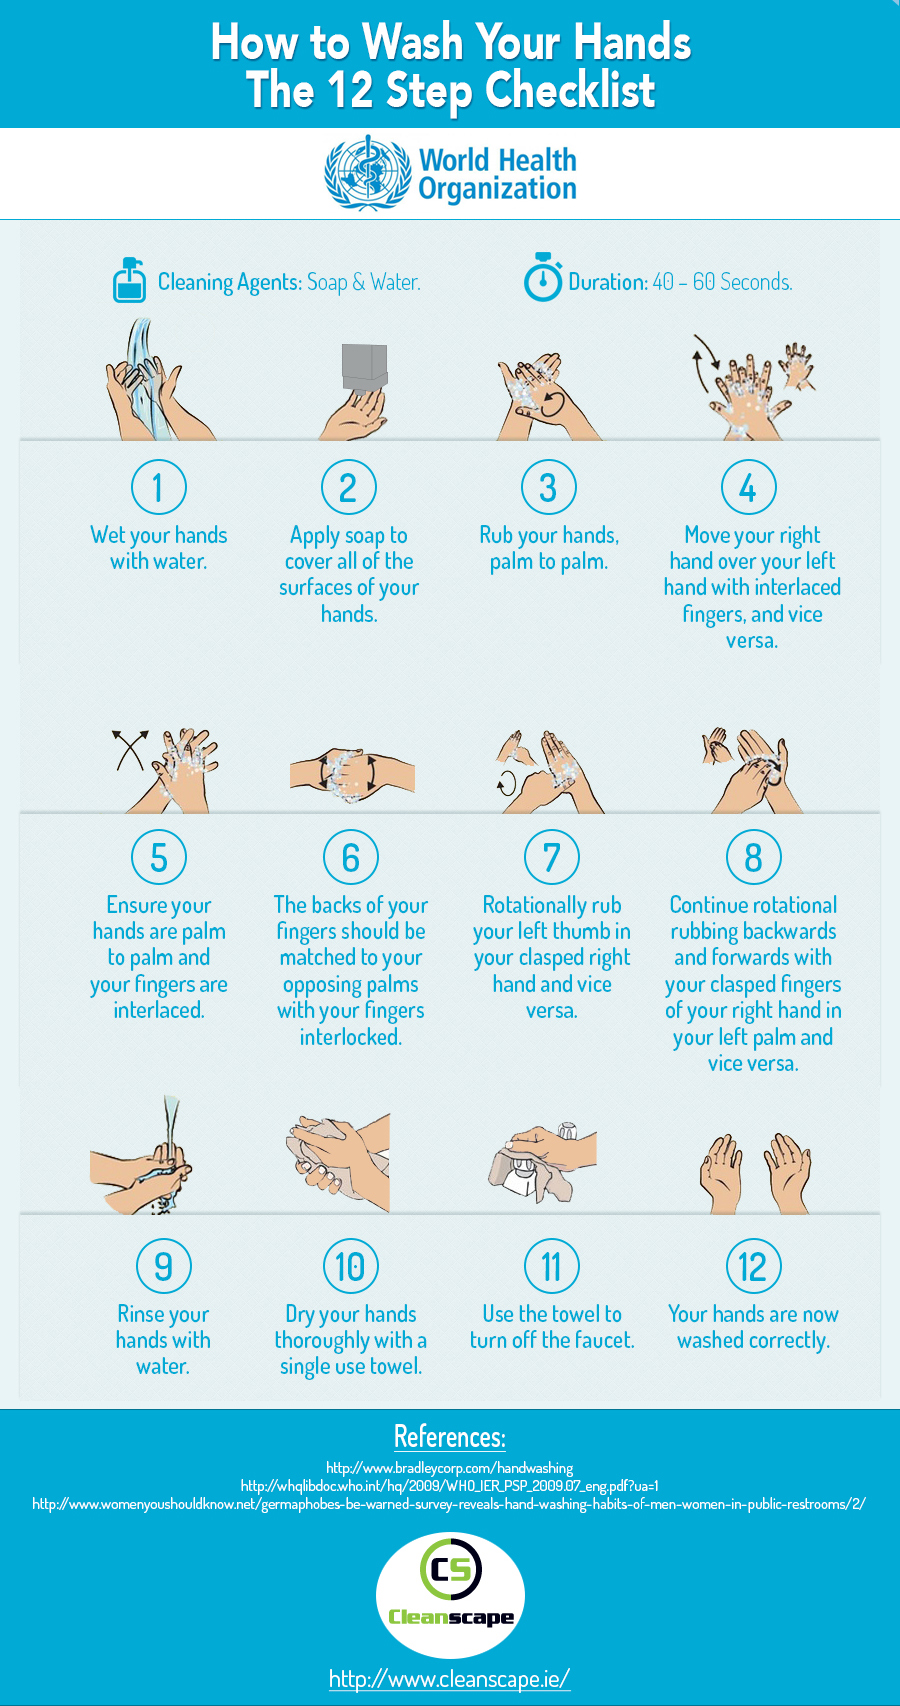 Wash Your Hands, The 12 Step Checklist ... | Visual.ly